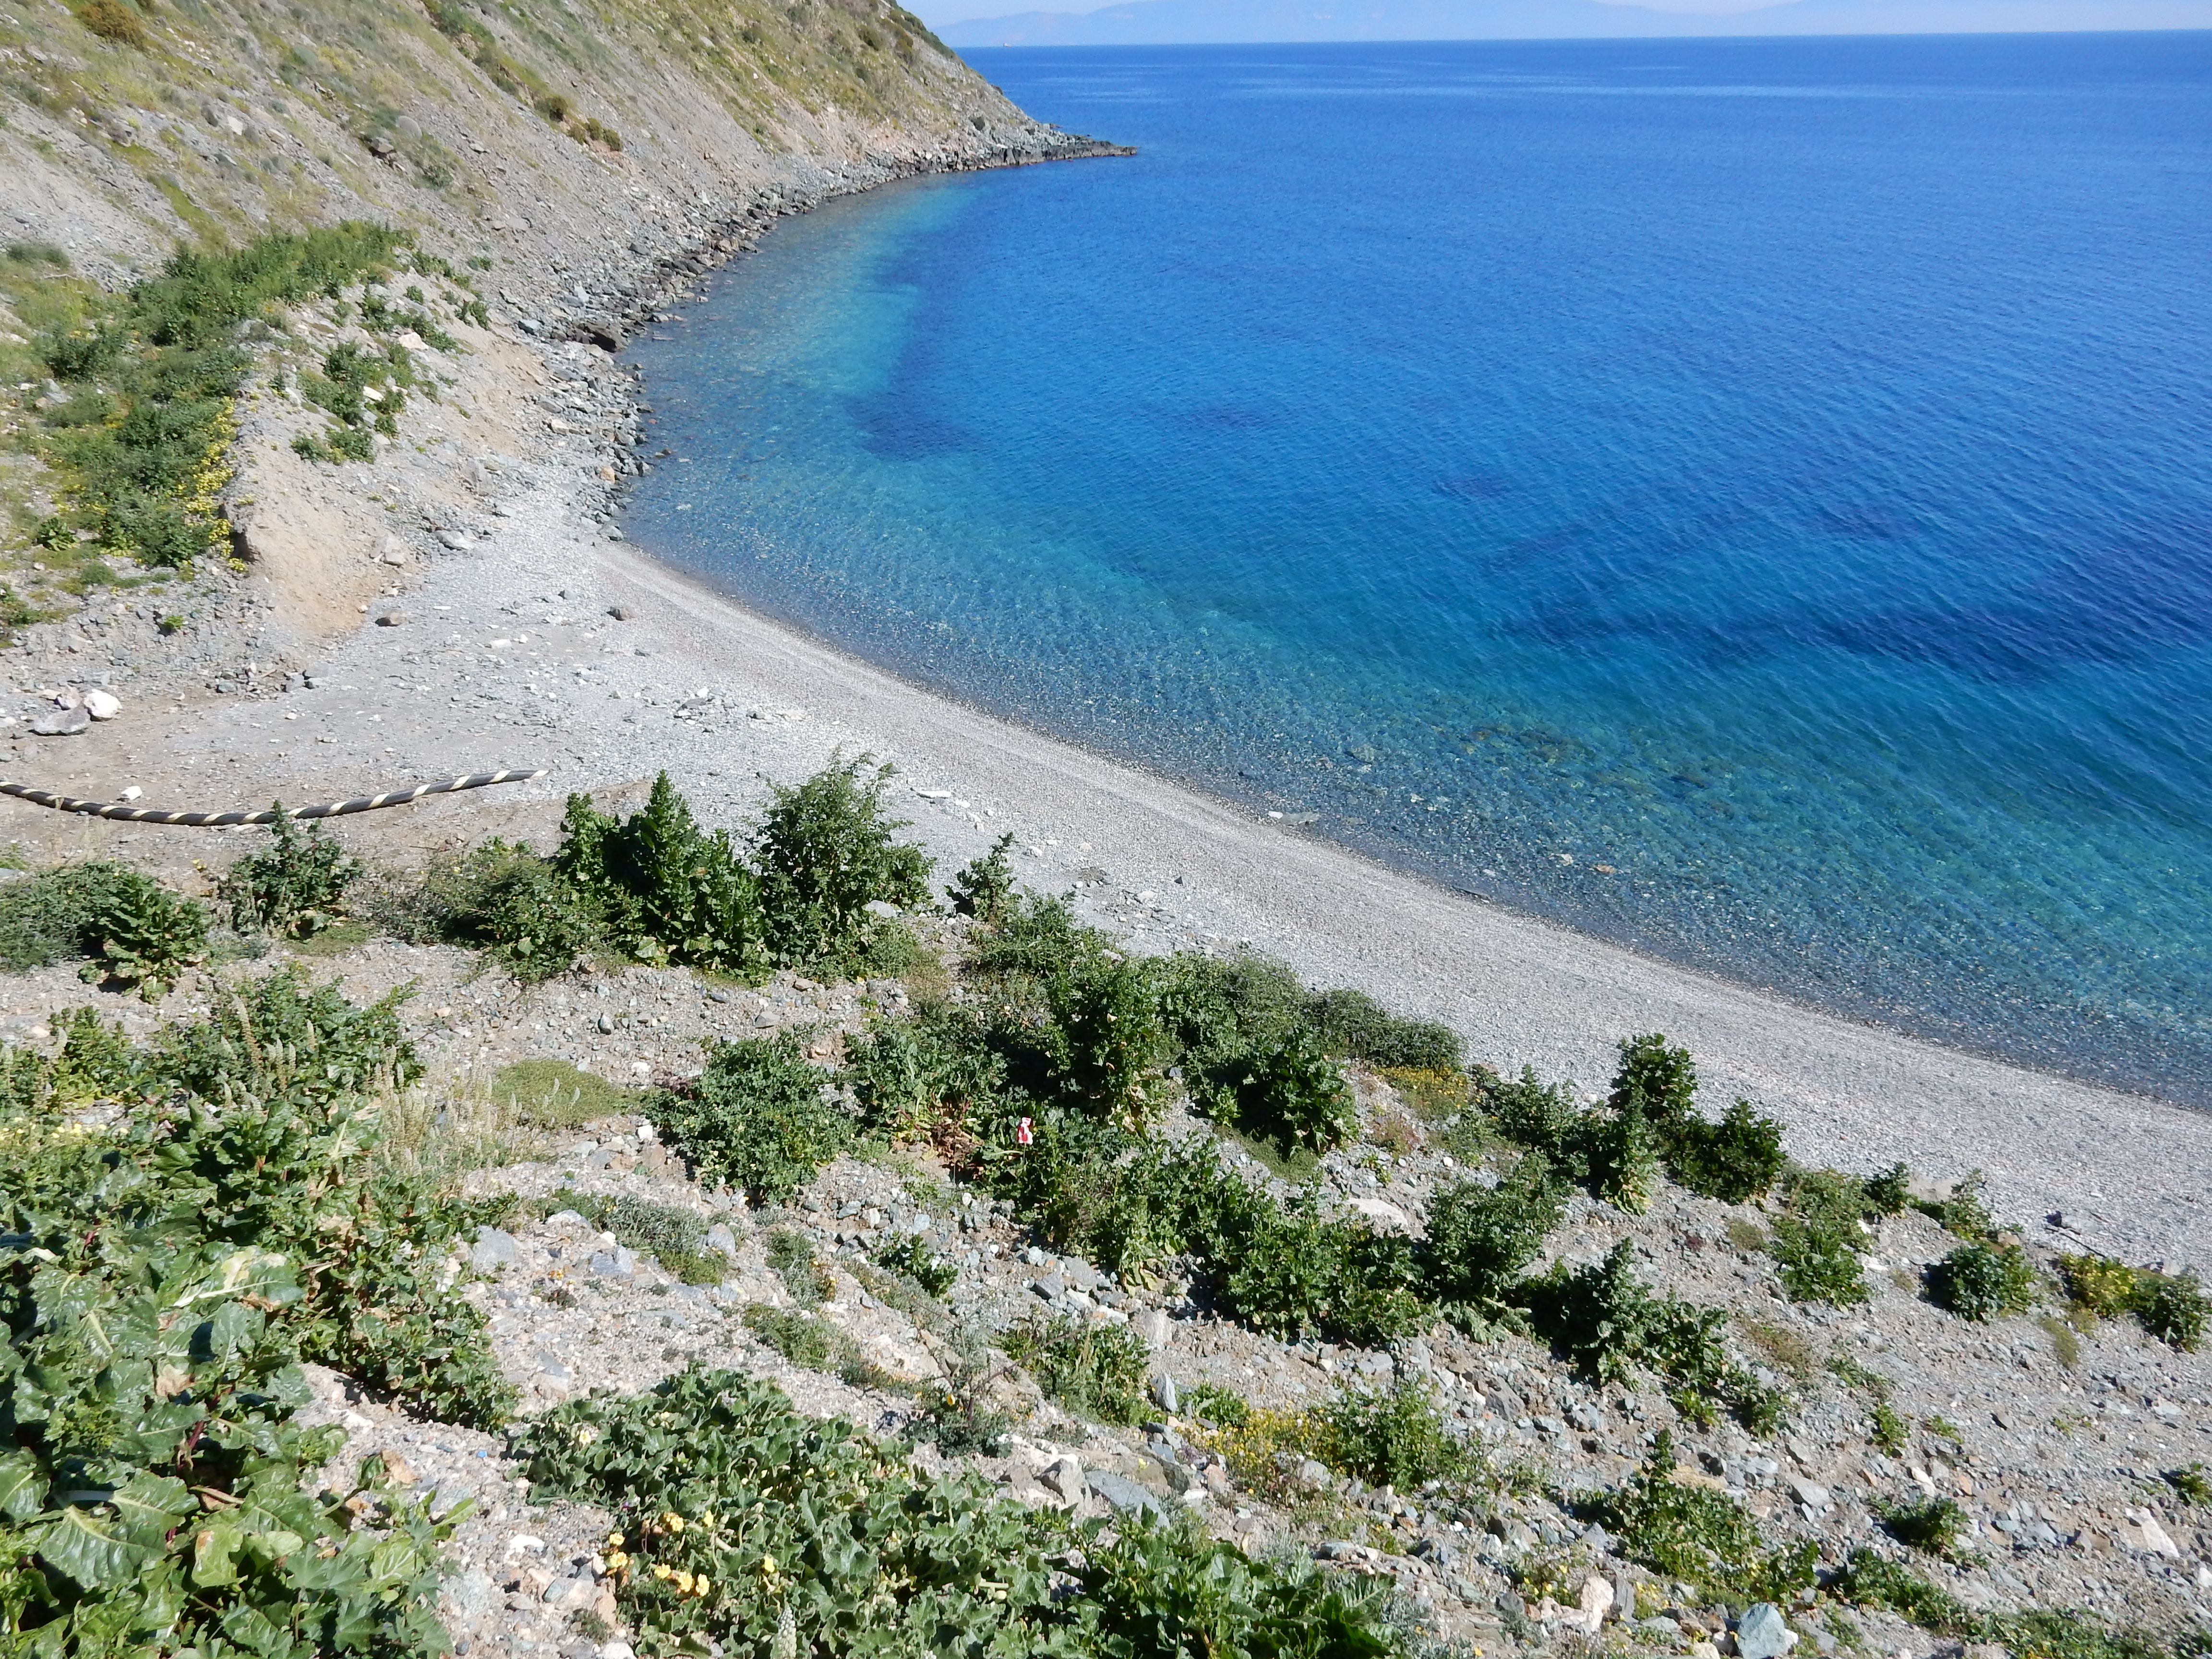 Hellenic Cables to connect several Greek islands